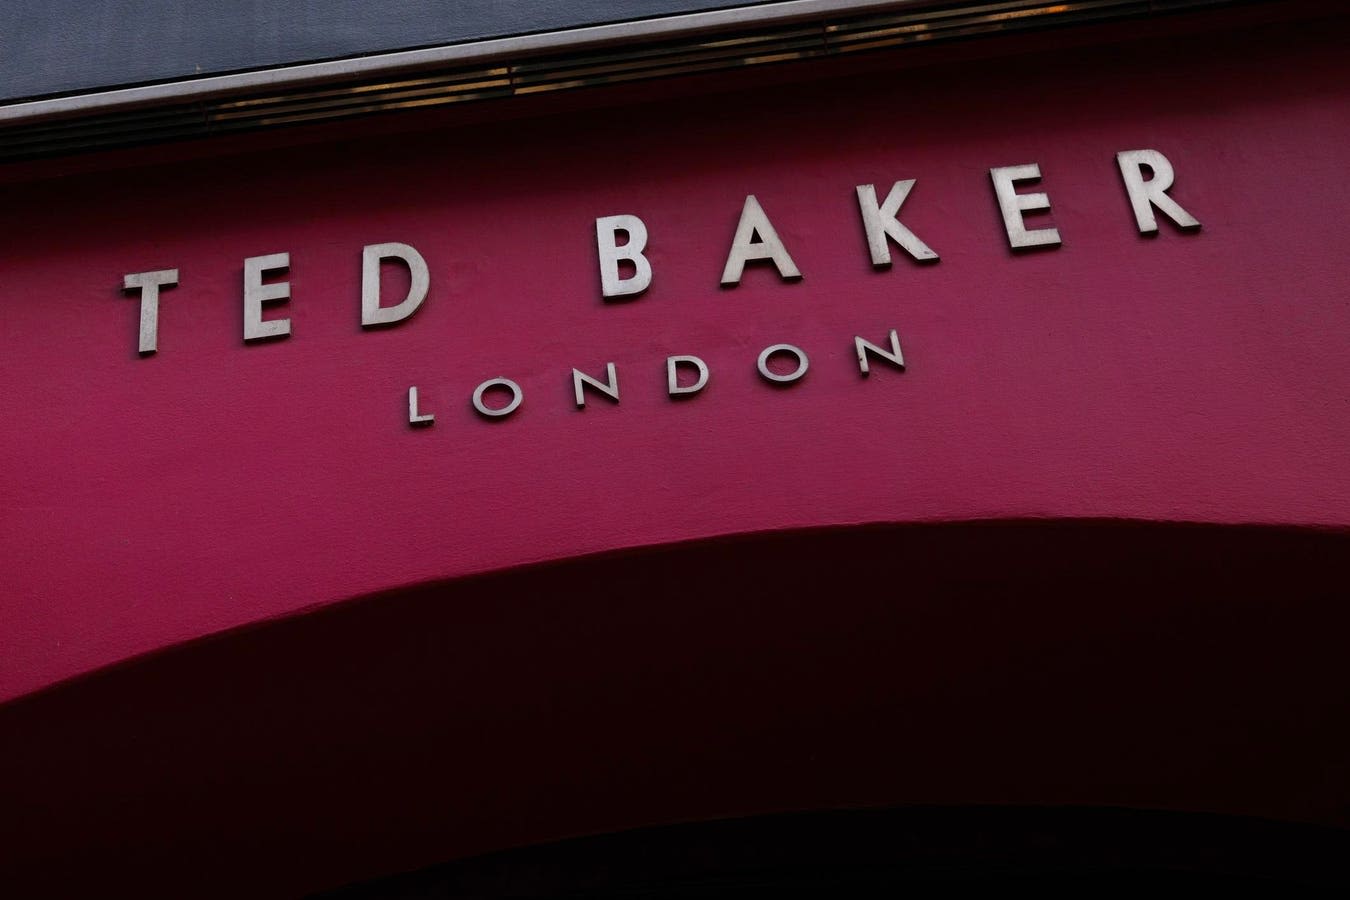 Ted Baker’s Future Uncertain: Likely Closure Of All UK Stores In Weeks